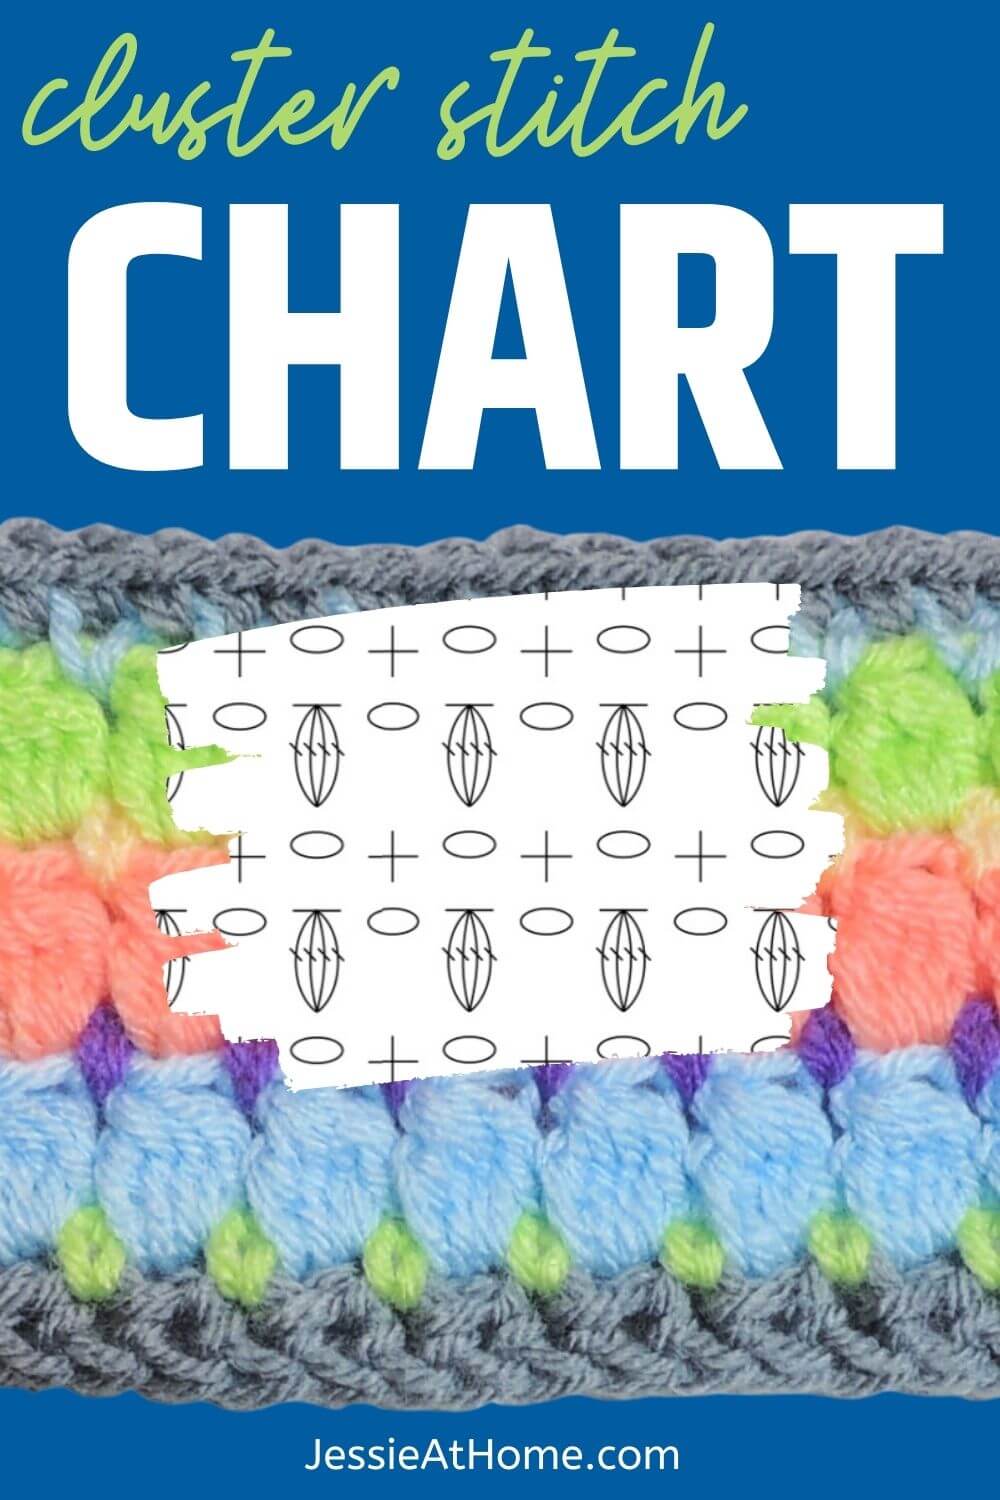 How To Crochet the 4 DC Cluster Stitch – Step-by-Step Tutorial